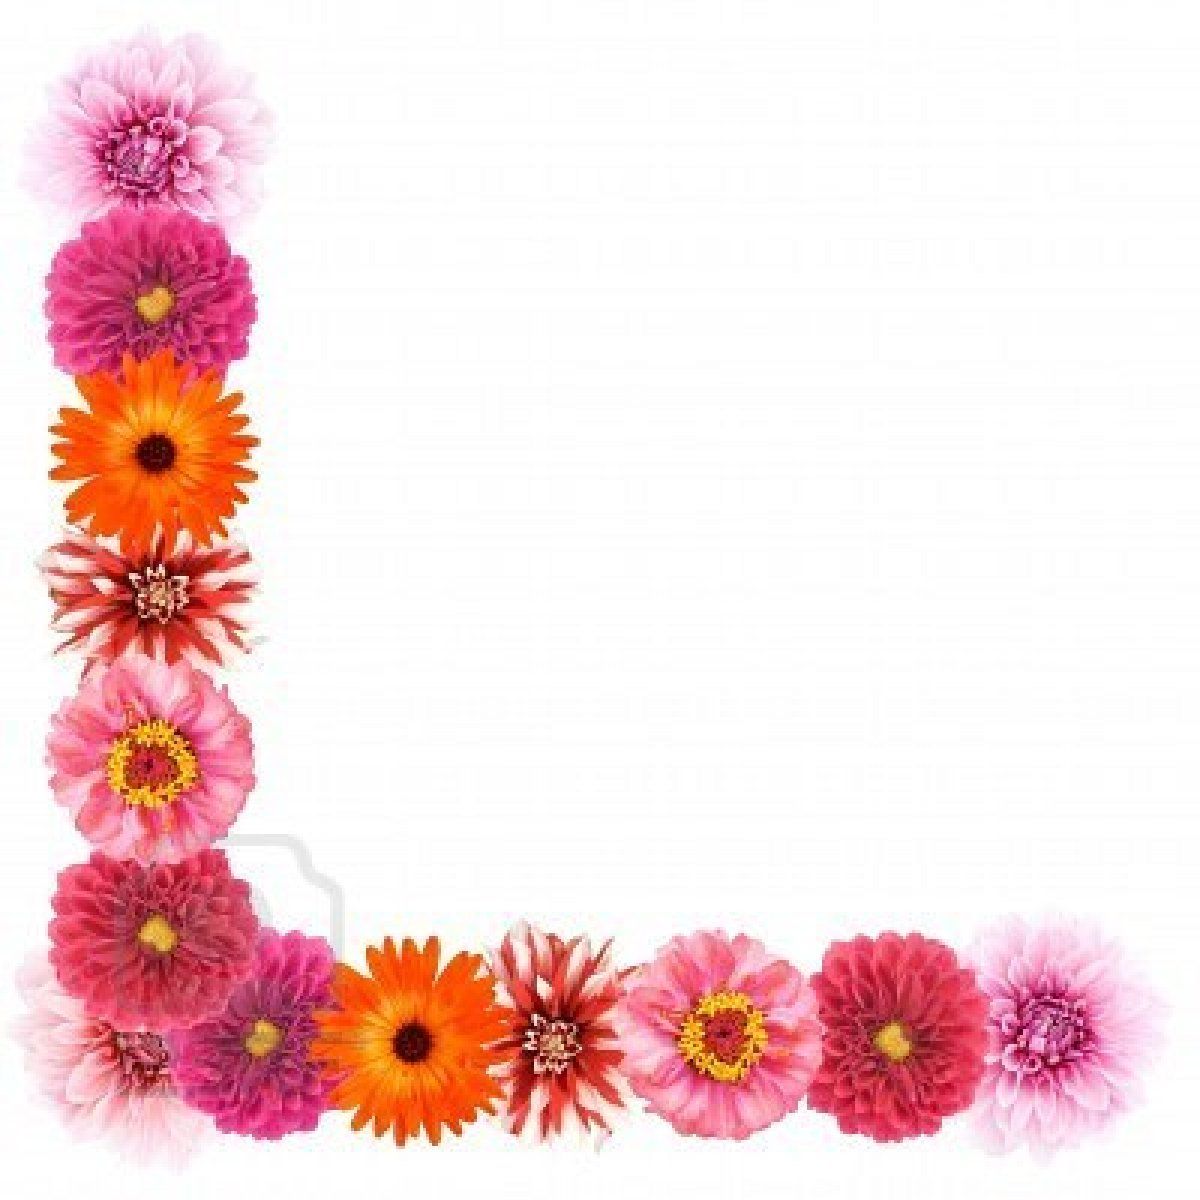 Free Flower Border Image, Download Free Clip Art, Free Clip Art on Clipart Library